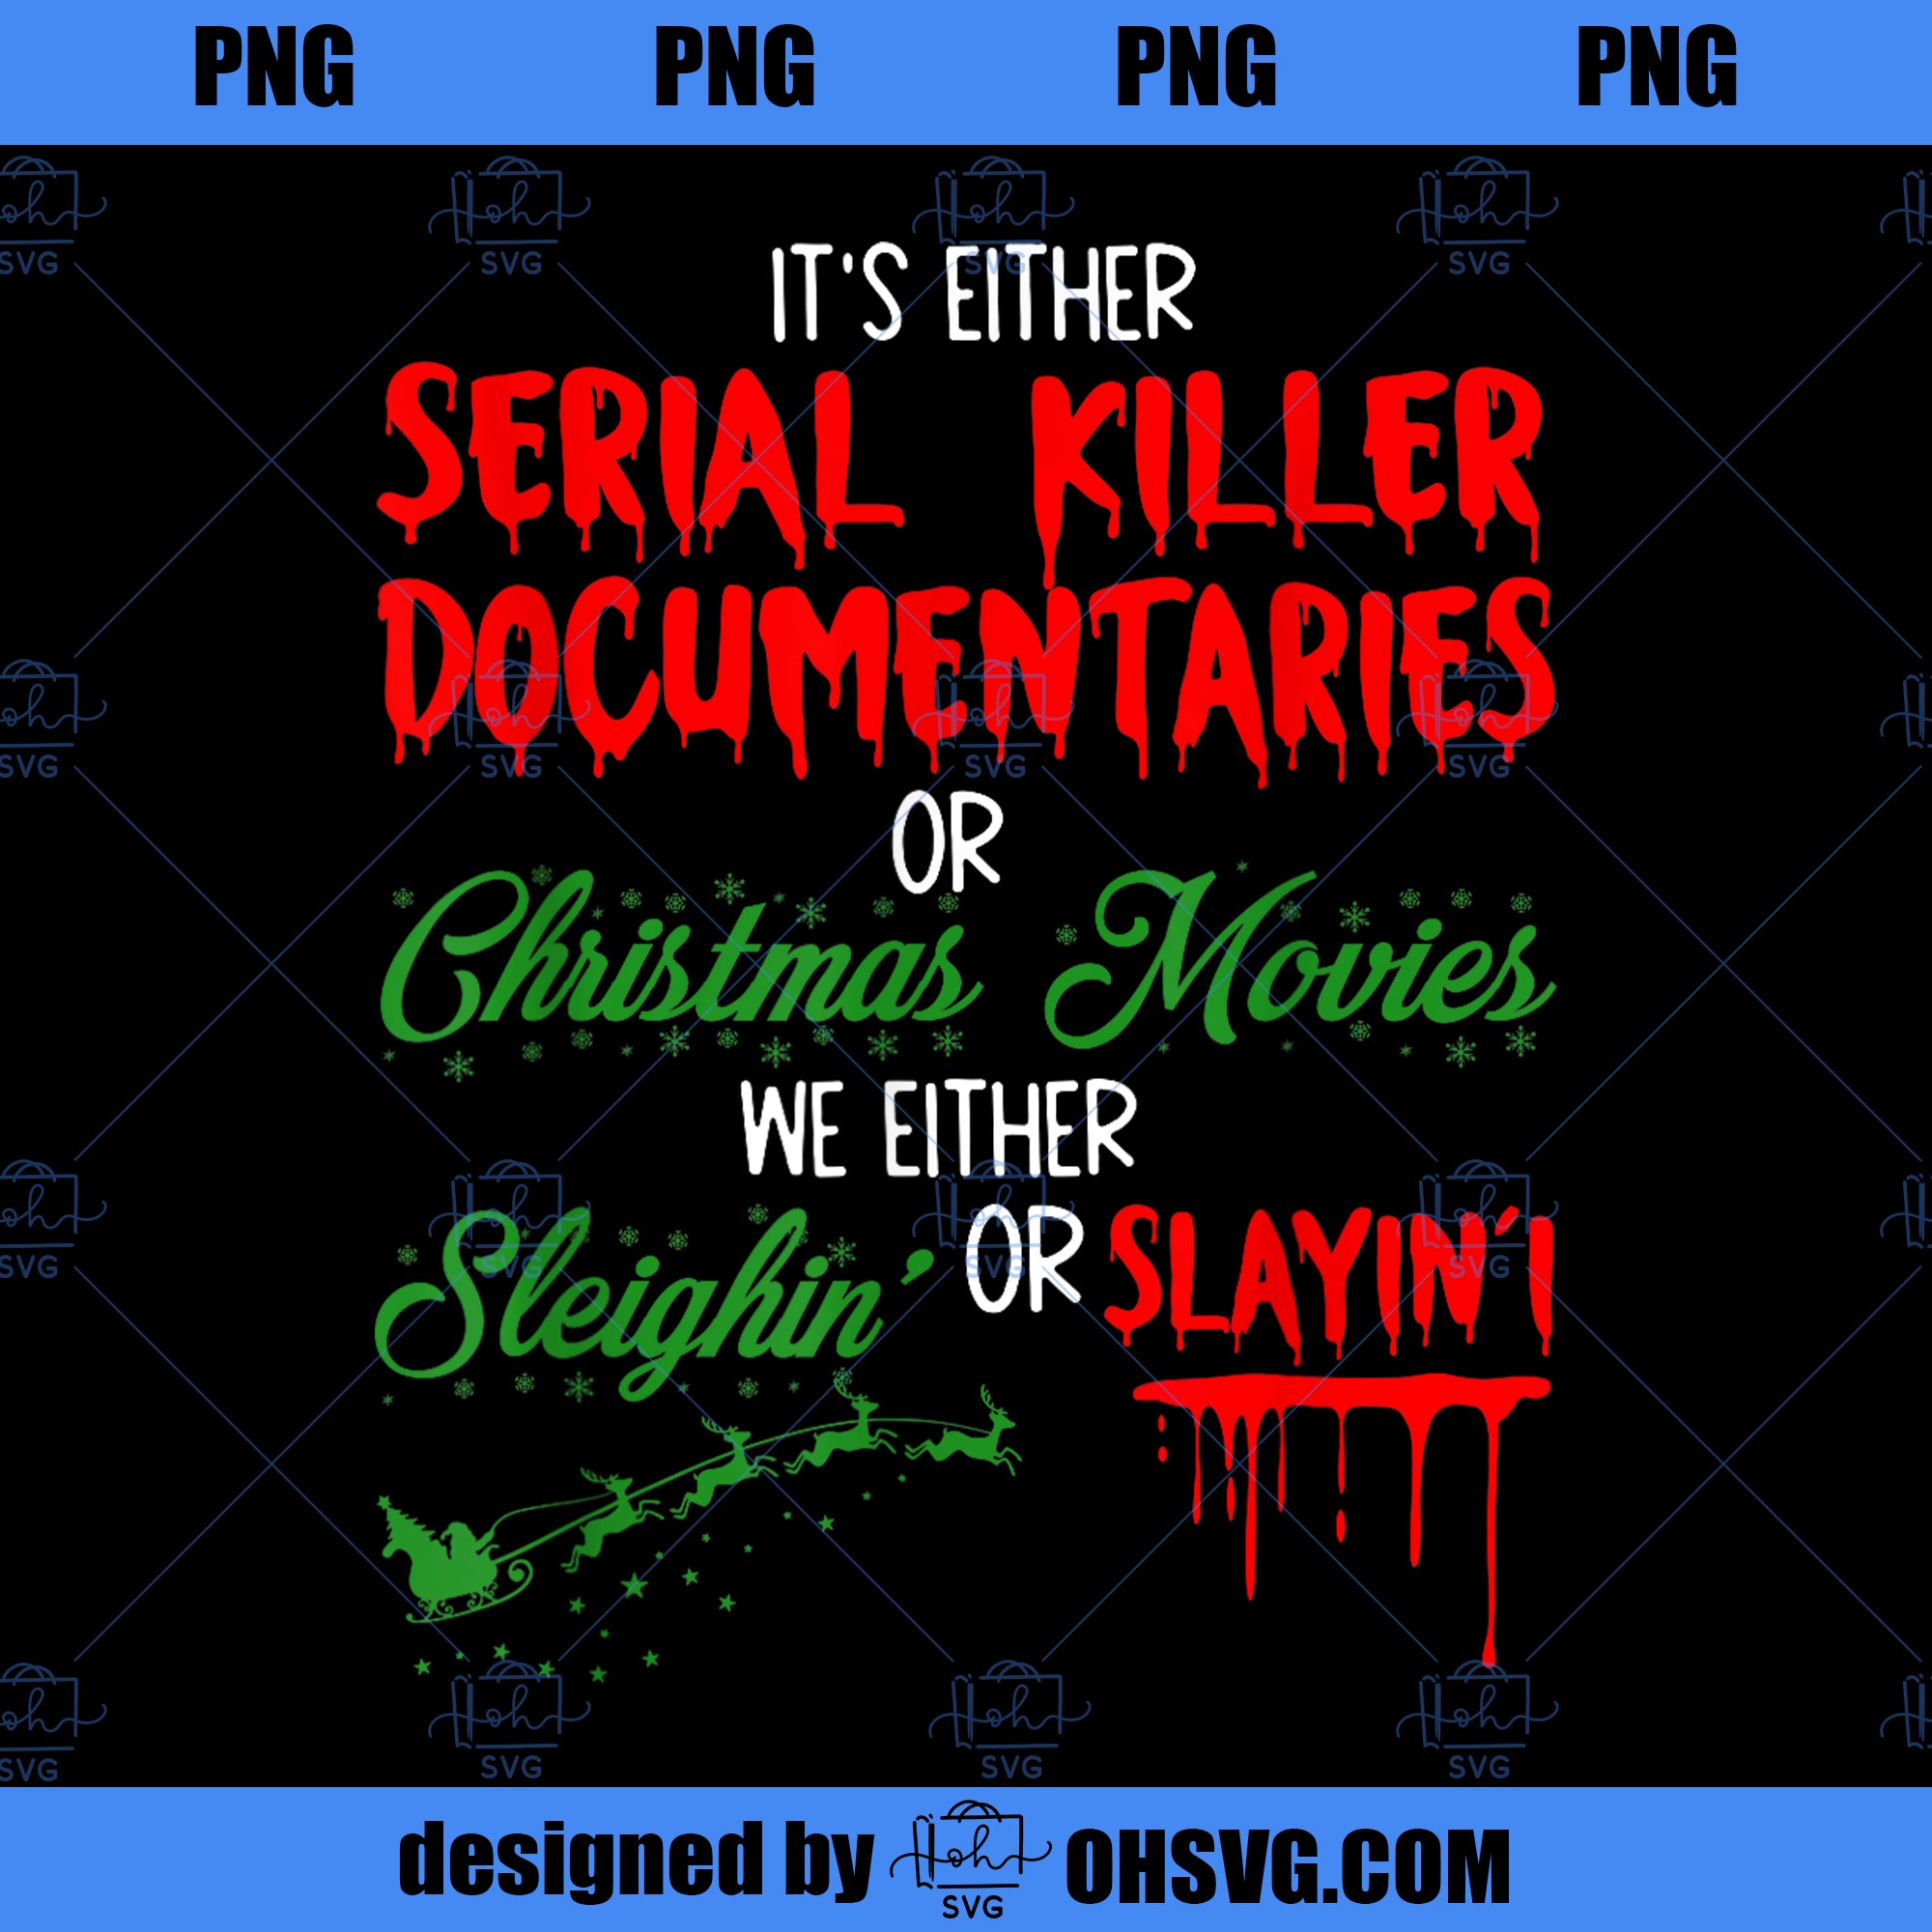 It s either serial killer documentaries or Christmas movies 1 PNG, Movies PNG, Christmas movies NG